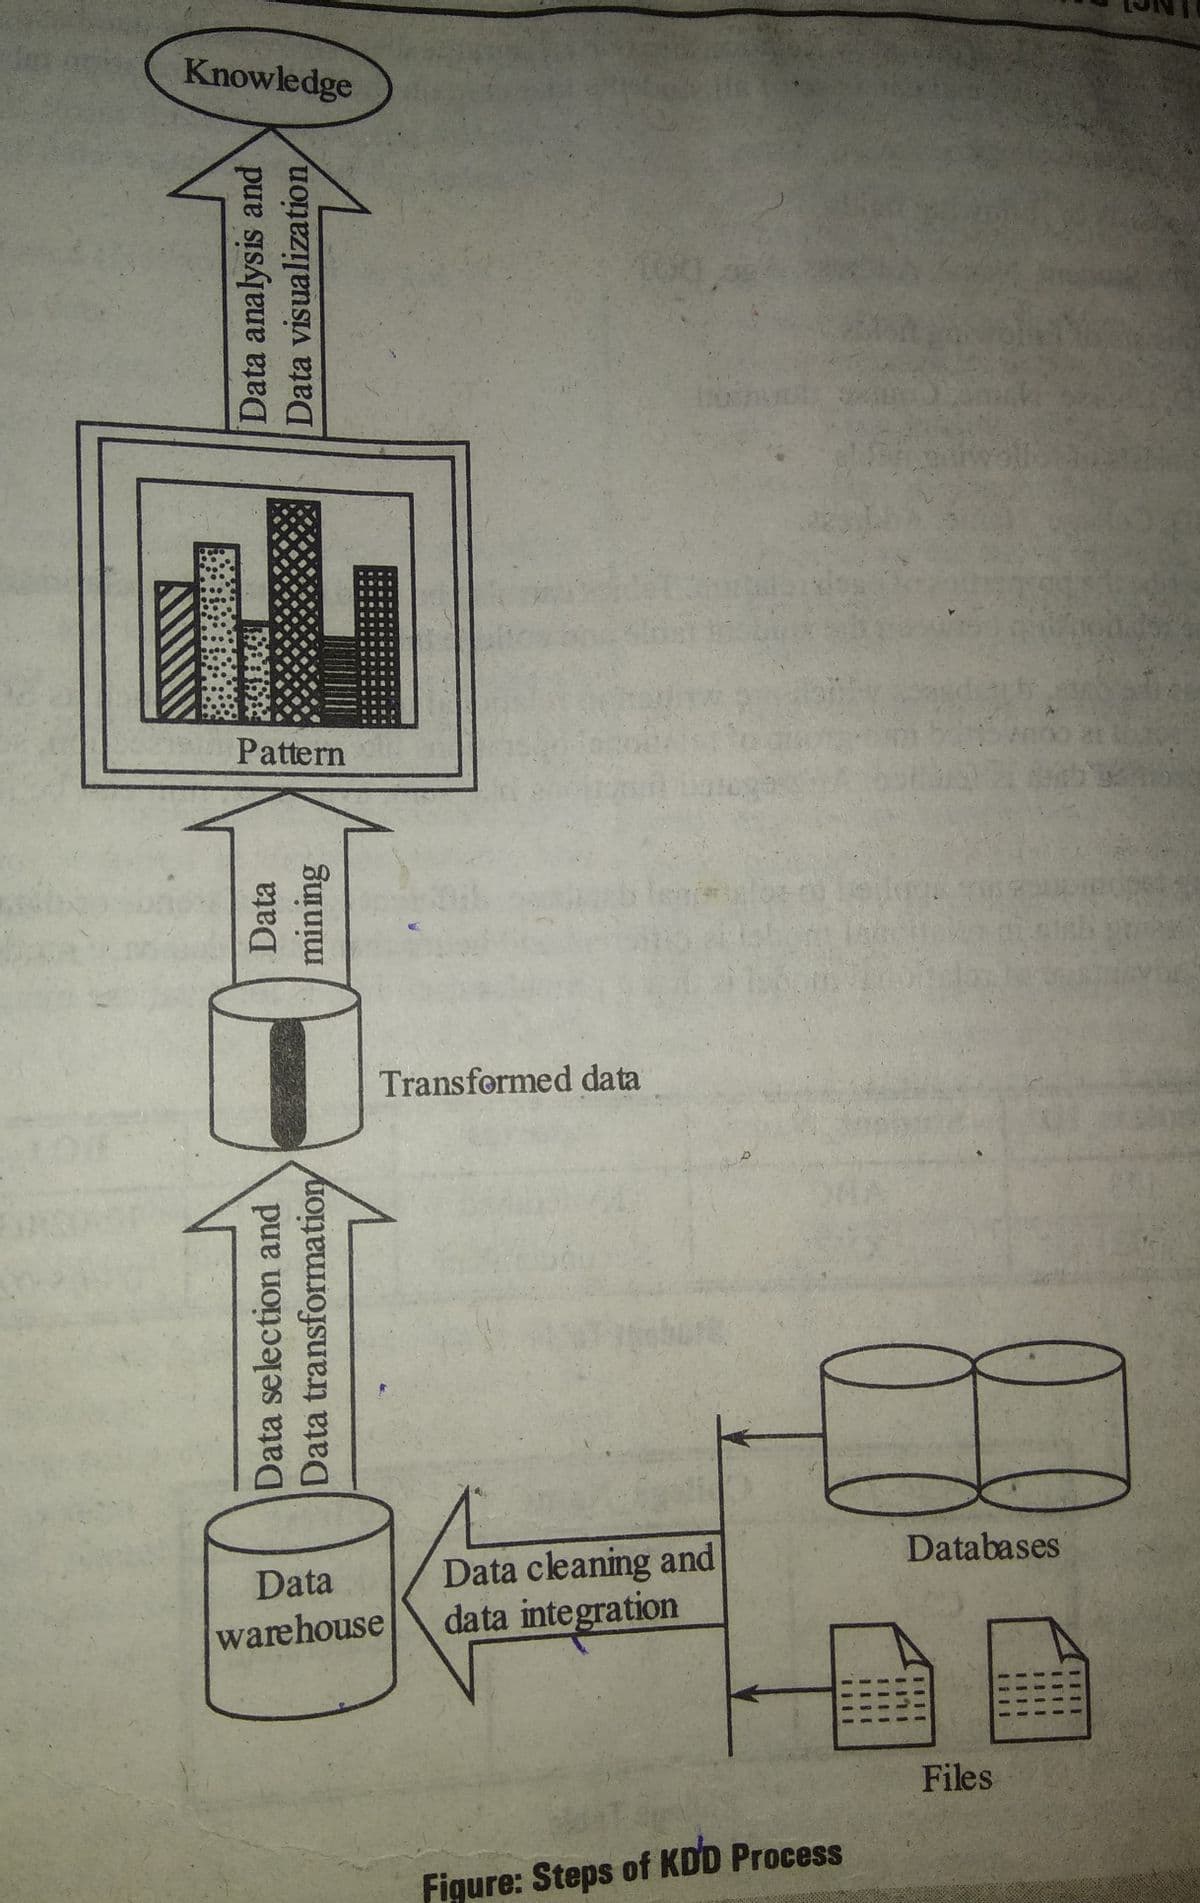 Knowledge
Pattern
Transformed data
Databases
Data cleaning and
data integration
Data
warehouse
Files
Figure: Steps of KDD Process
Data analysis and
Data visualization
Data selection and
Data
Data transformation
mining
11 11
